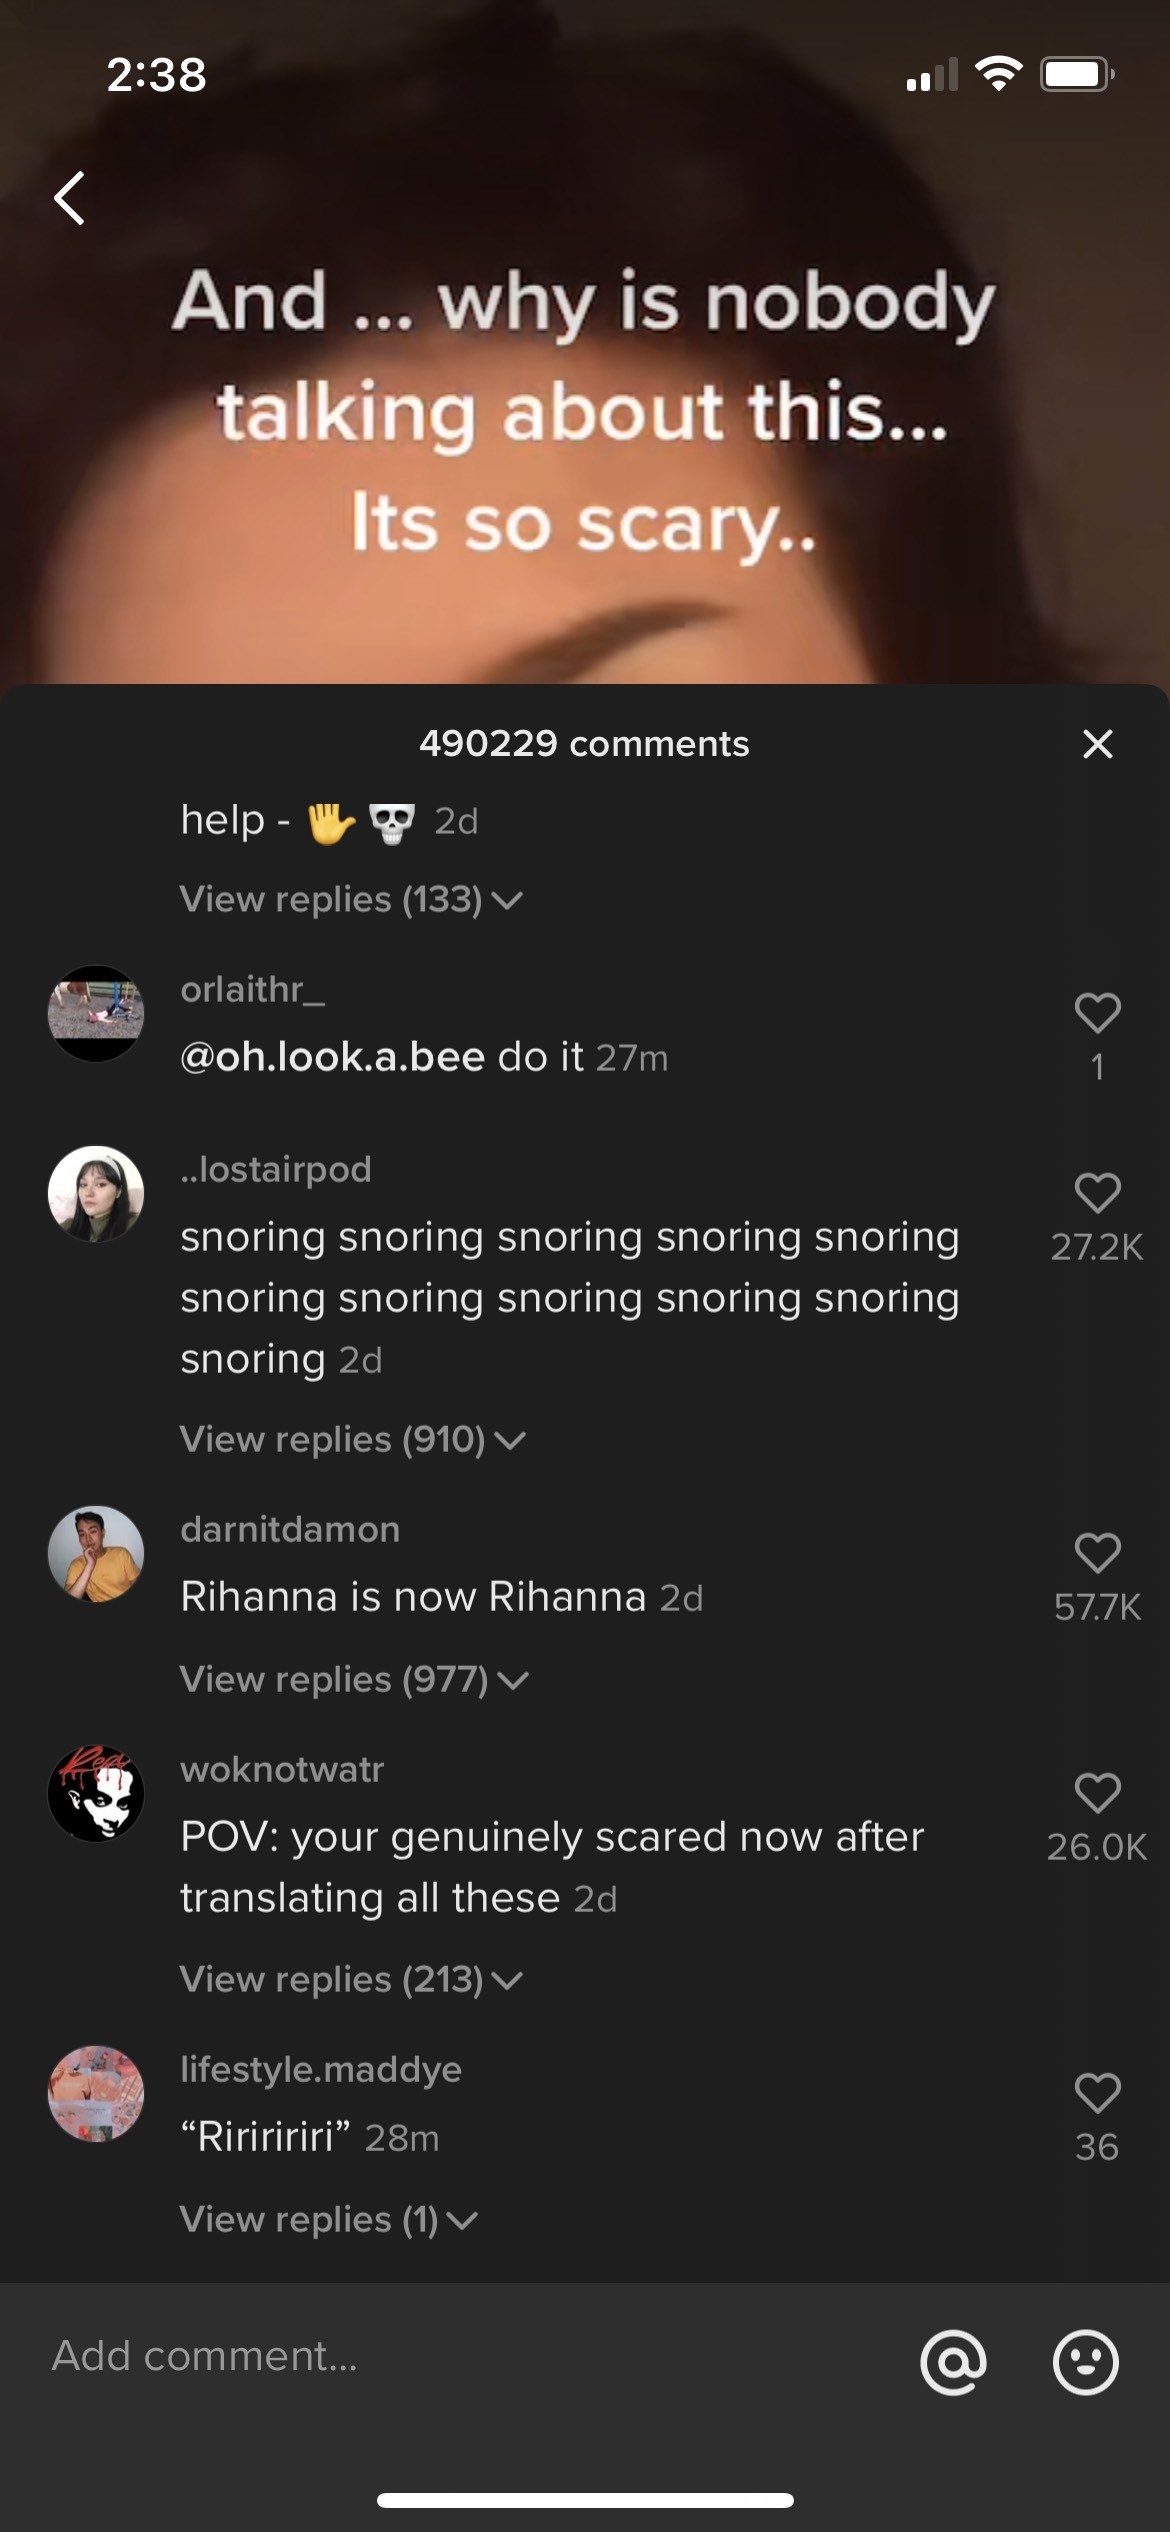 The translated versions, one of which just repeats the word &quot;snoring&quot; and the other says &quot;Rihanna is now Rihanna&quot;